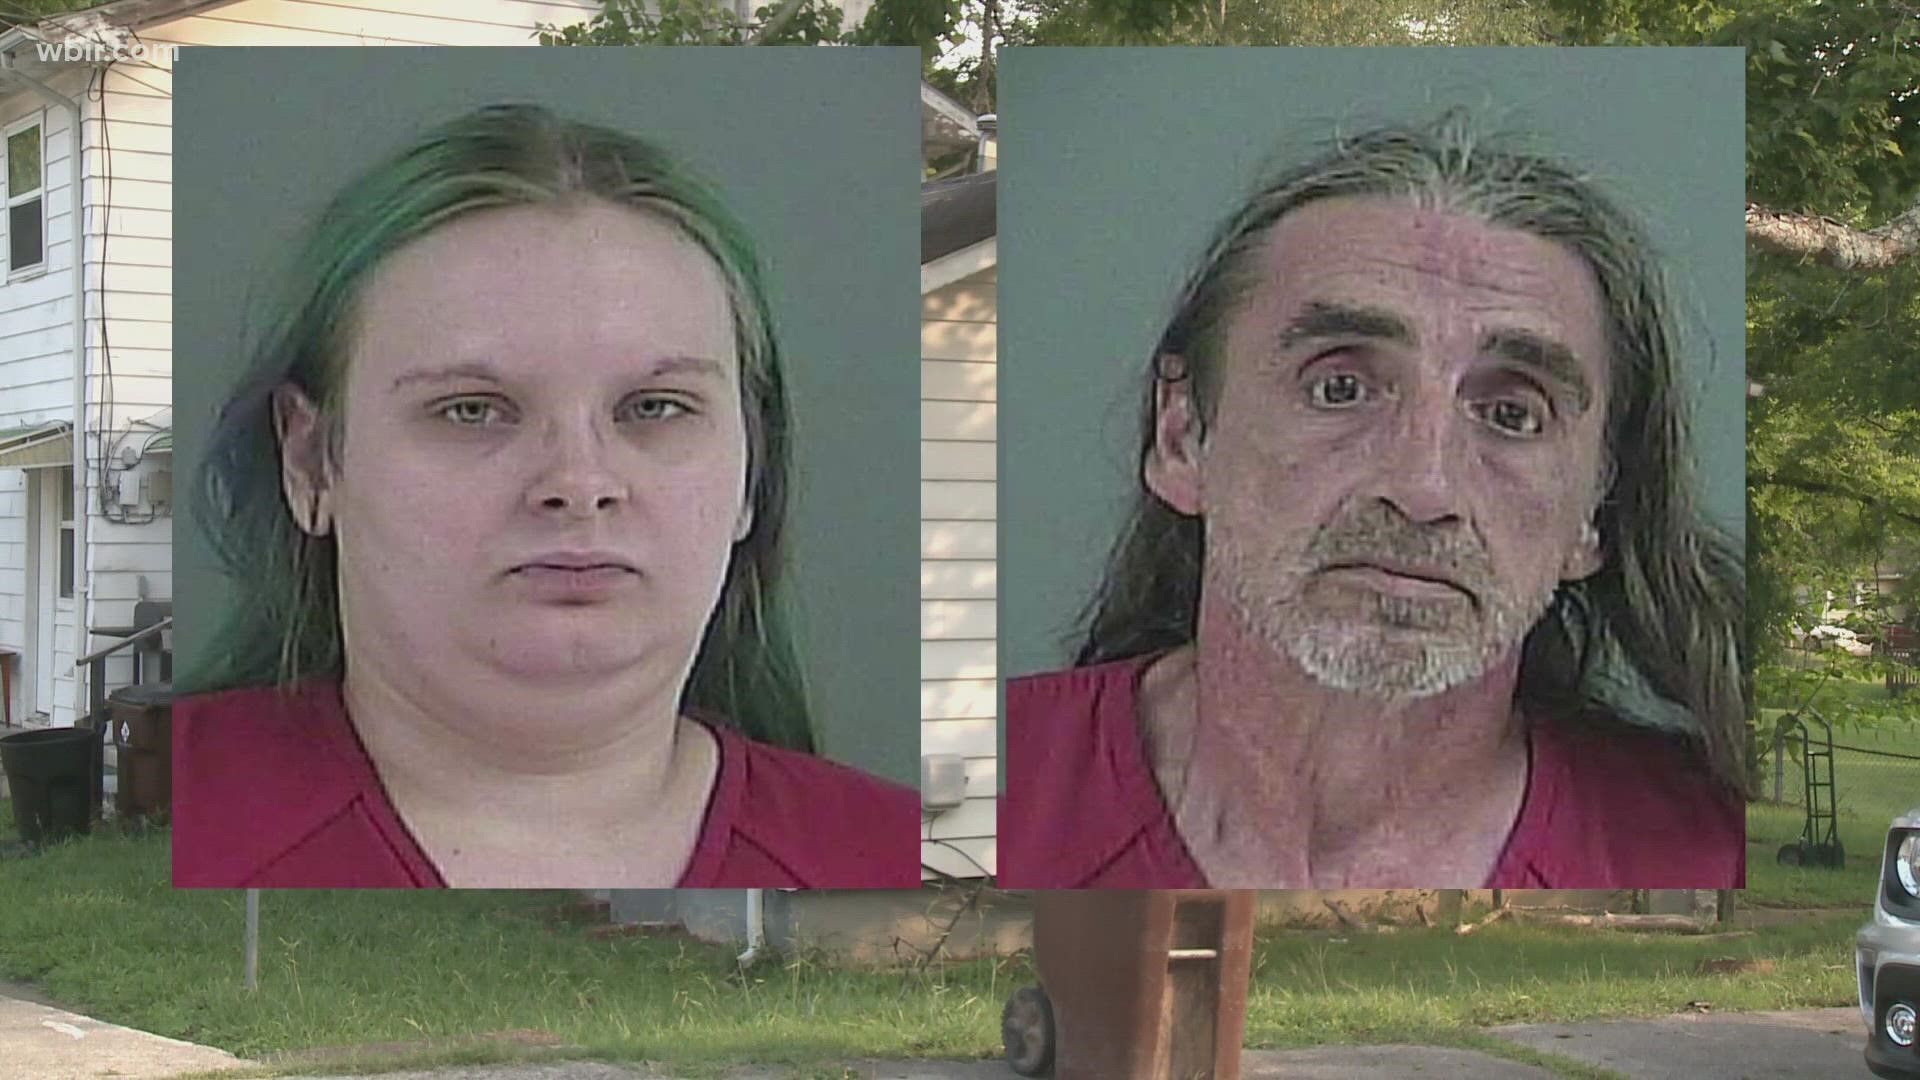 DA Dave Clark announced Monday his office is seeking the death penalty against a man and woman accused of murdering a homeless woman in Oak Ridge in 2019.